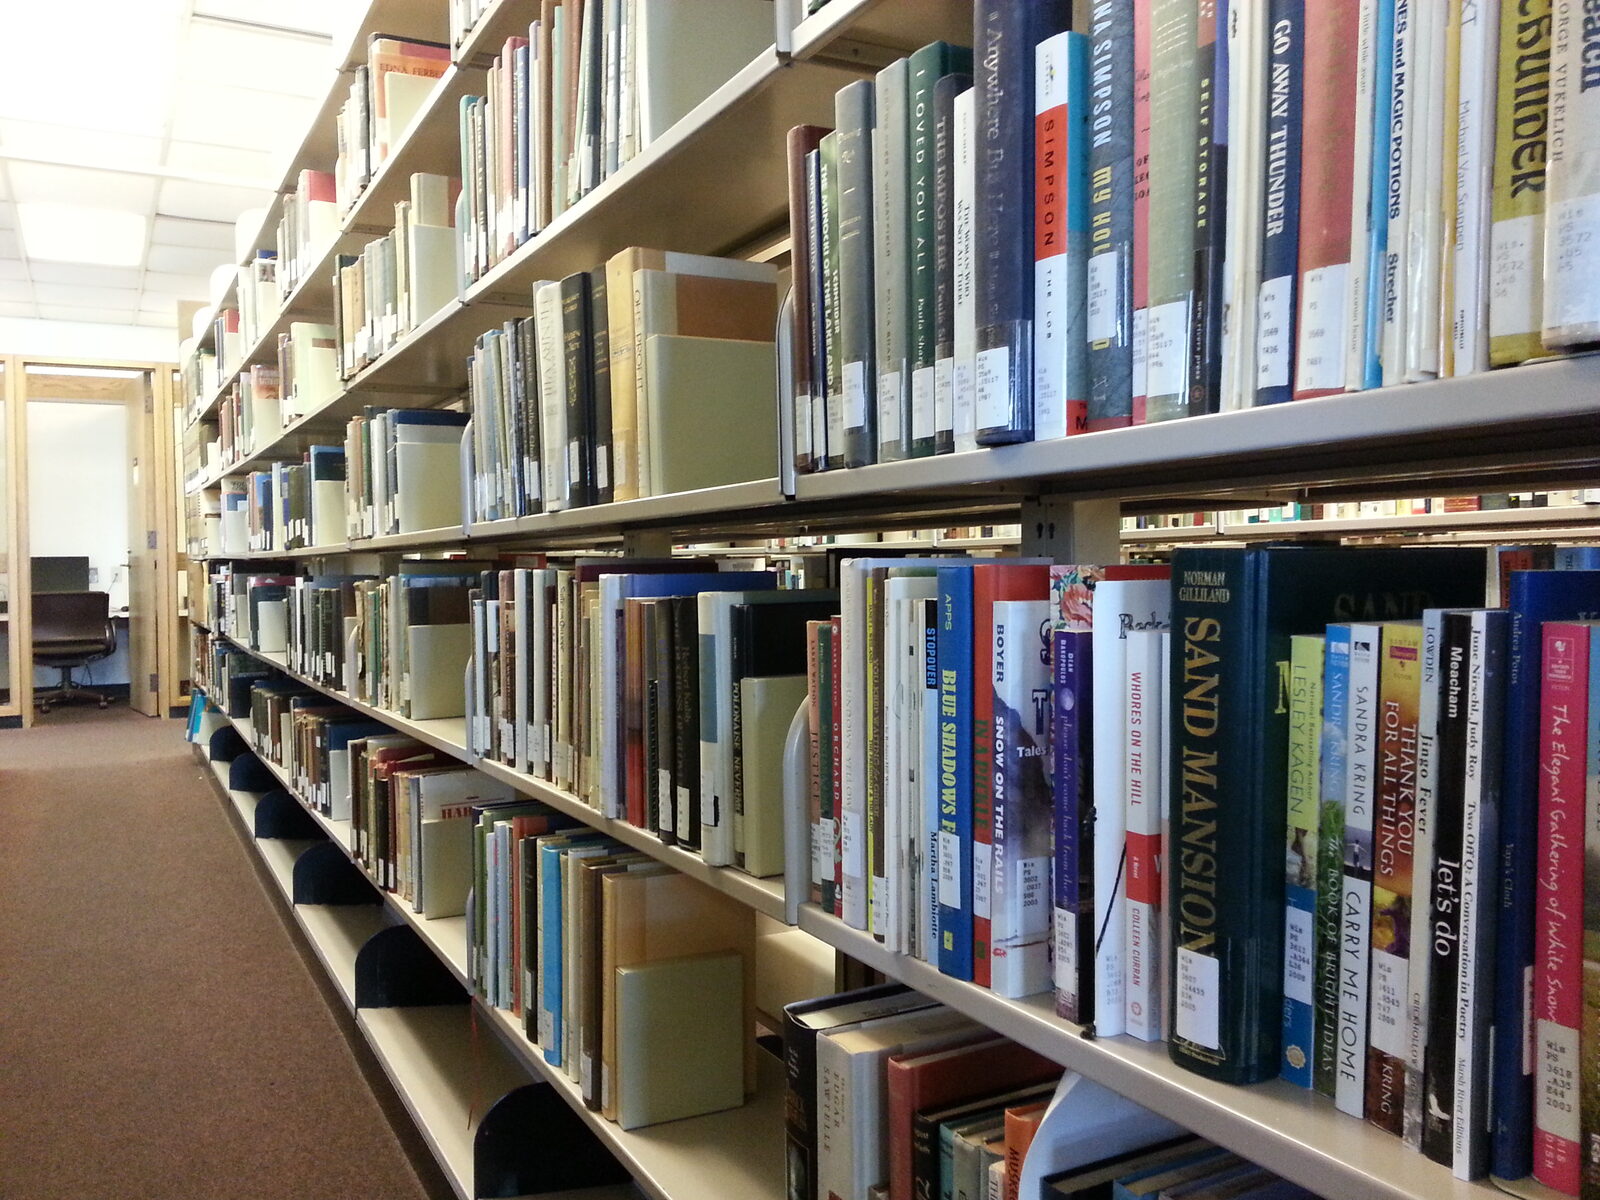 view down an aisle of books in the library